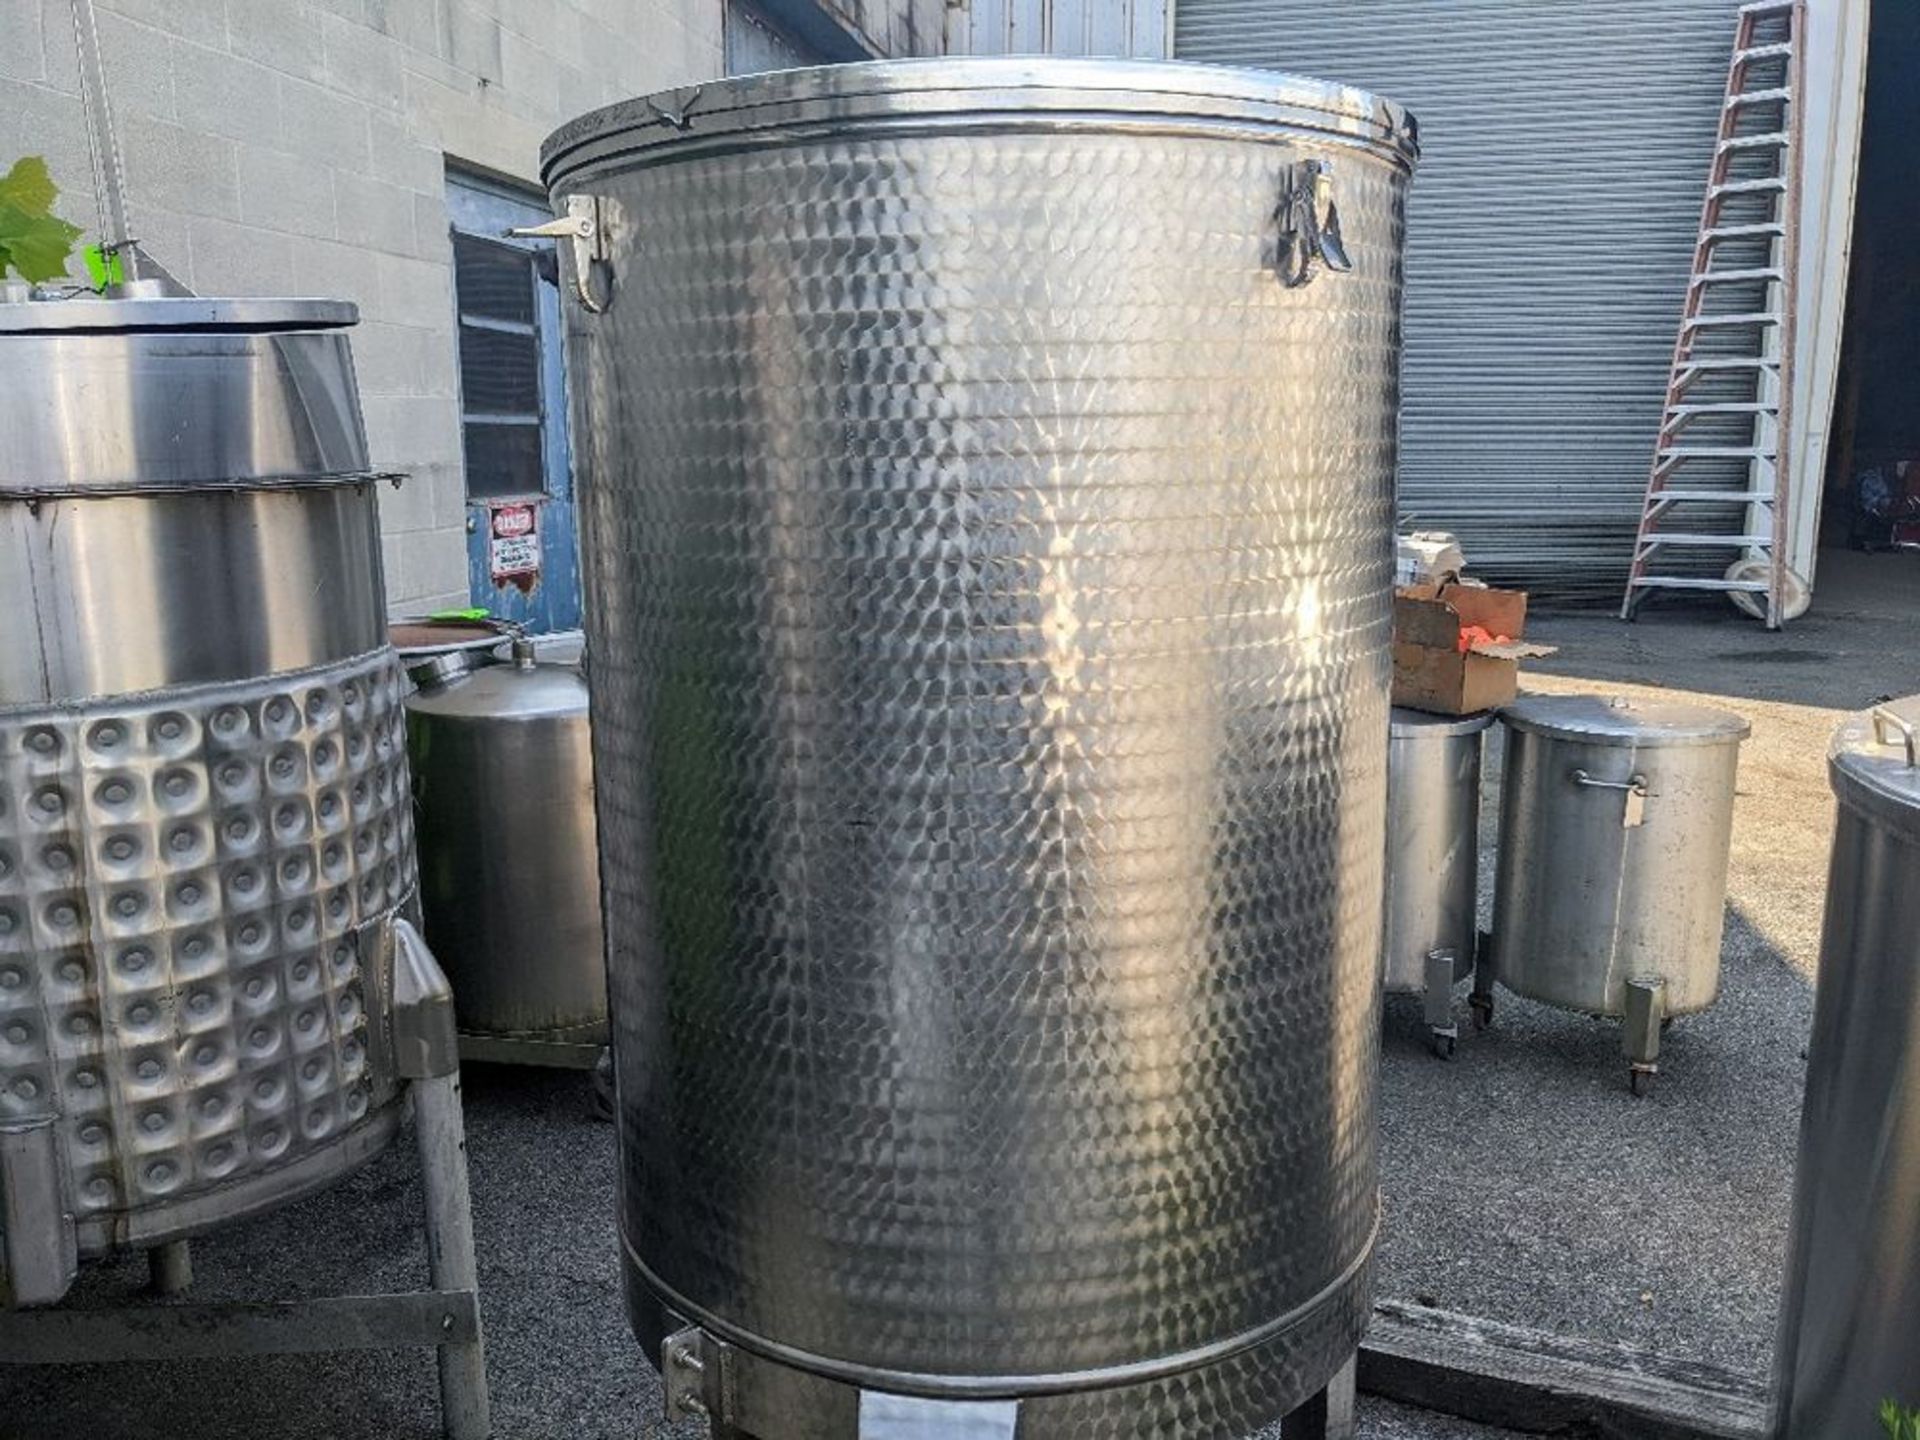 Qty (1) Brevetti 150 Gallon Open Top Tank - Portable stainless steel open top tank w/ lid. - 32' - Image 4 of 4